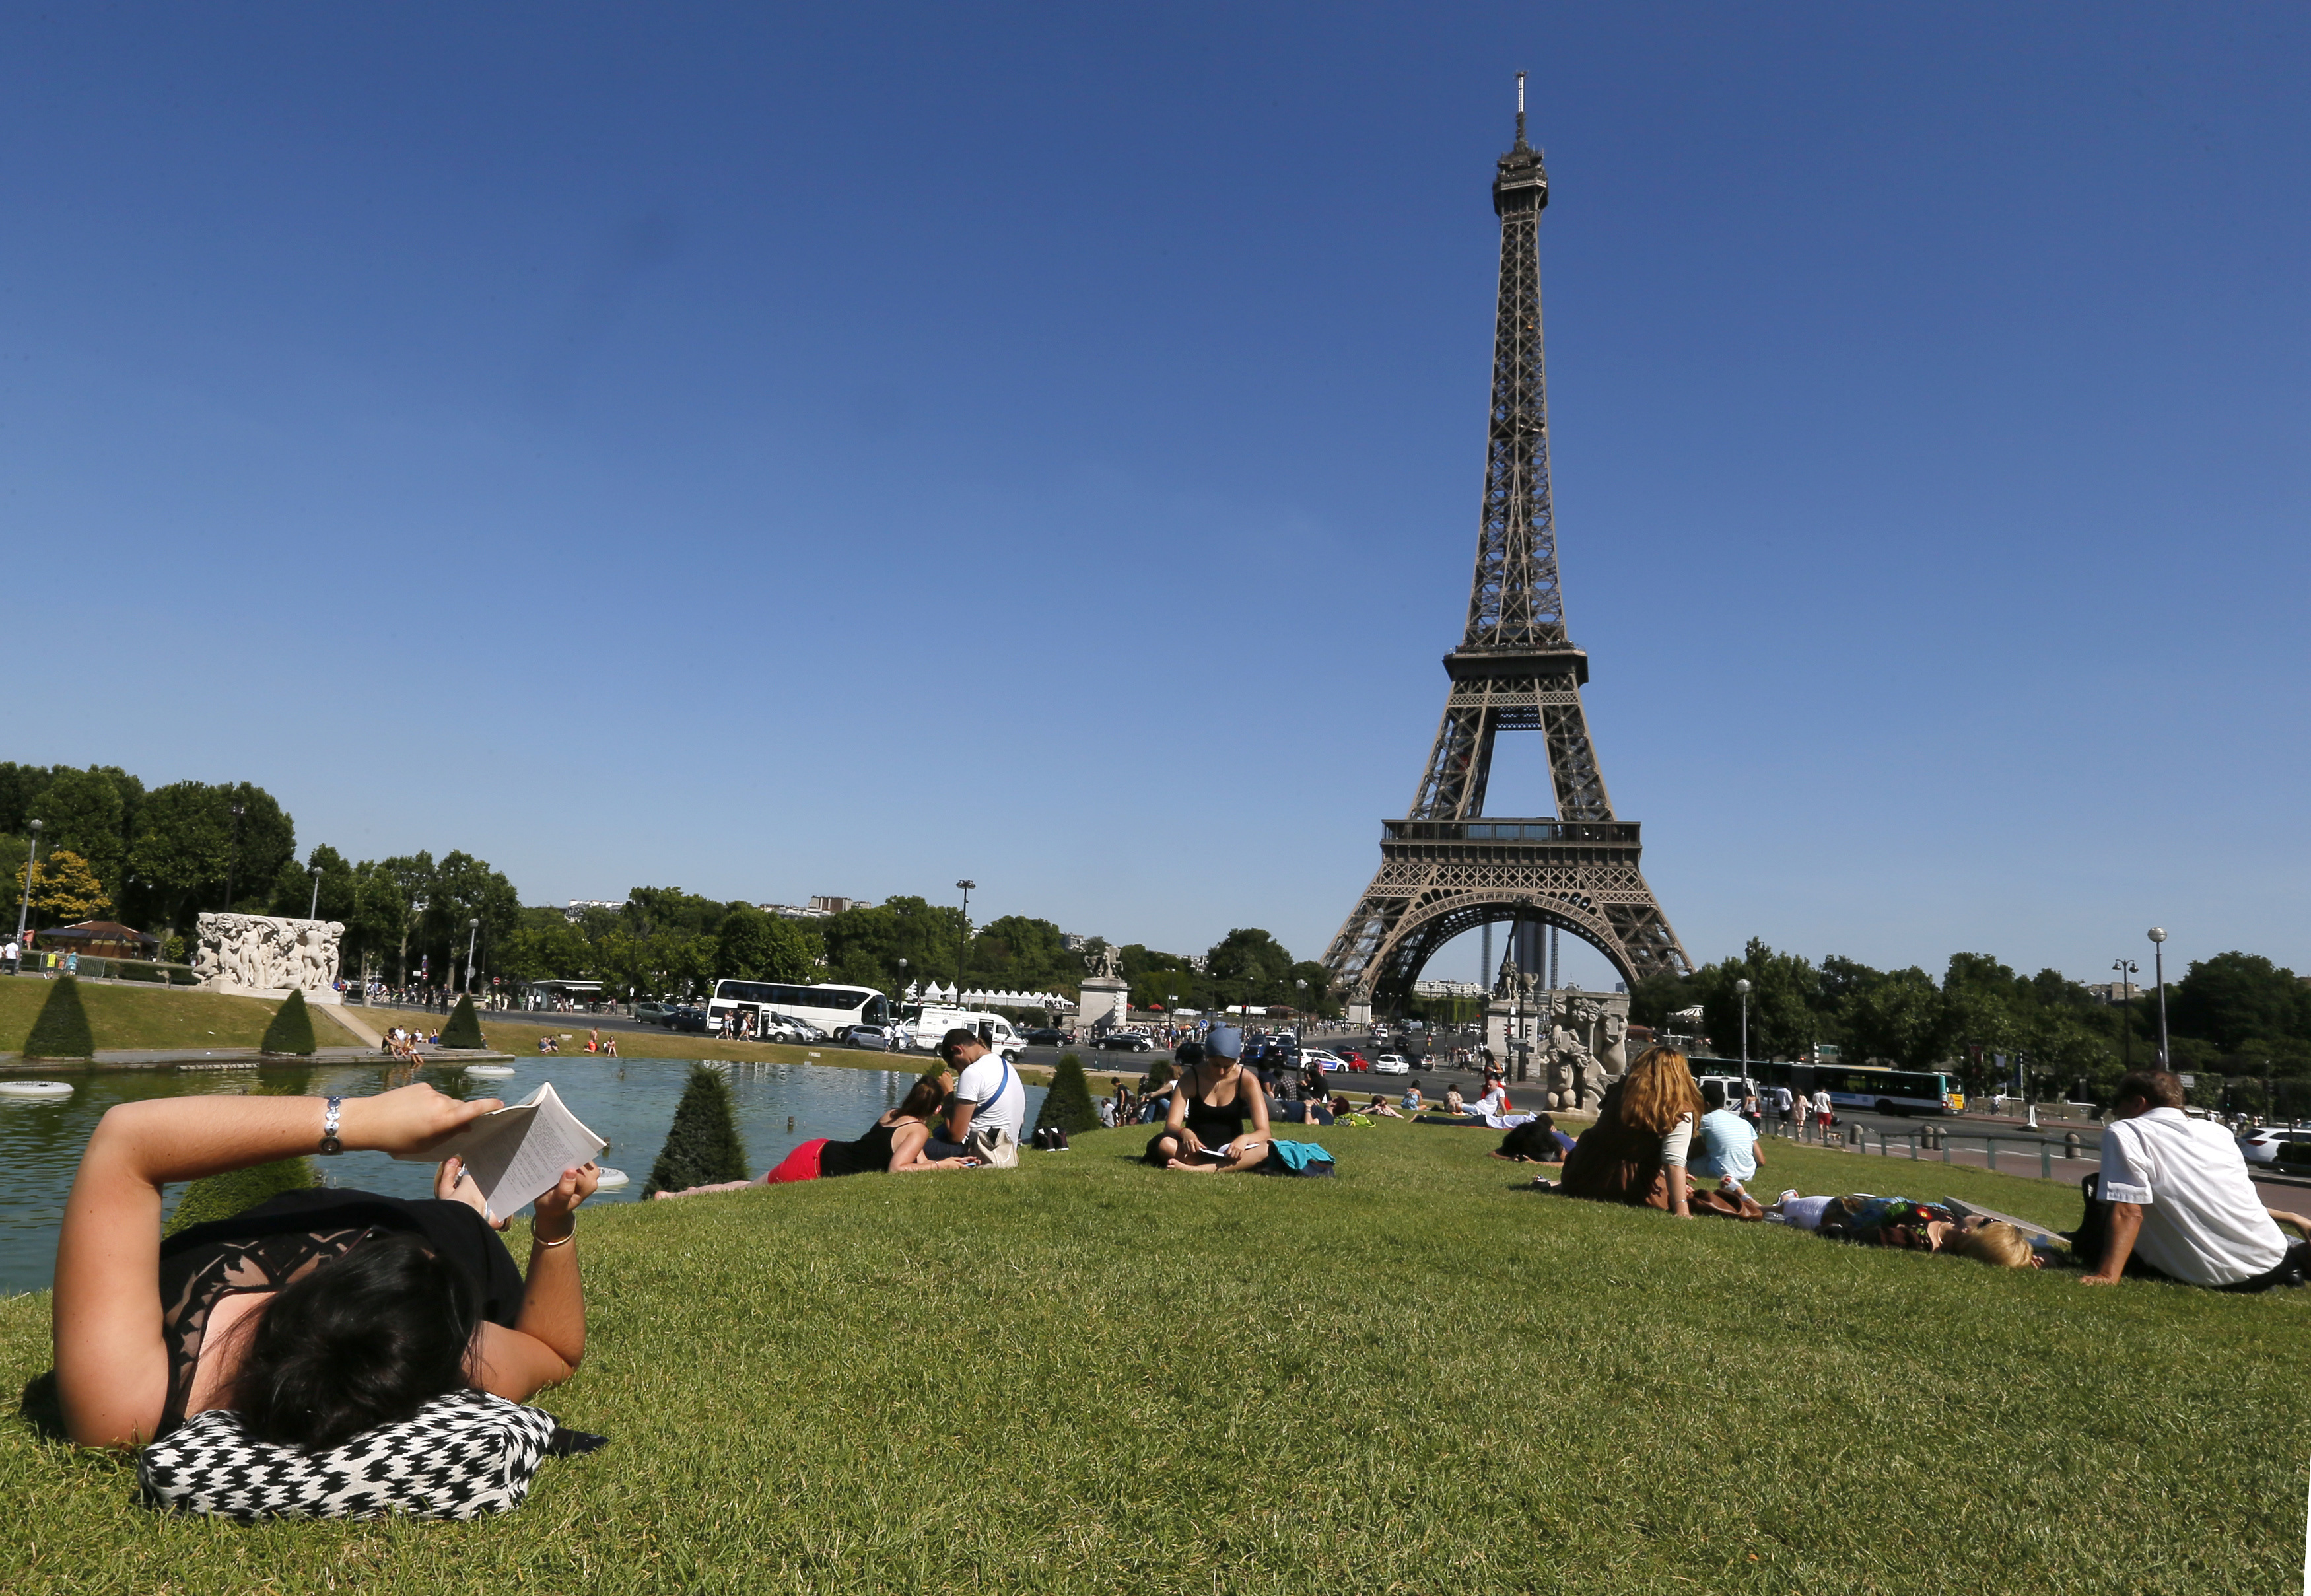 A woman reads a book as she rests in a public garden near the Eiffel Tower on a hot summer day in Paris